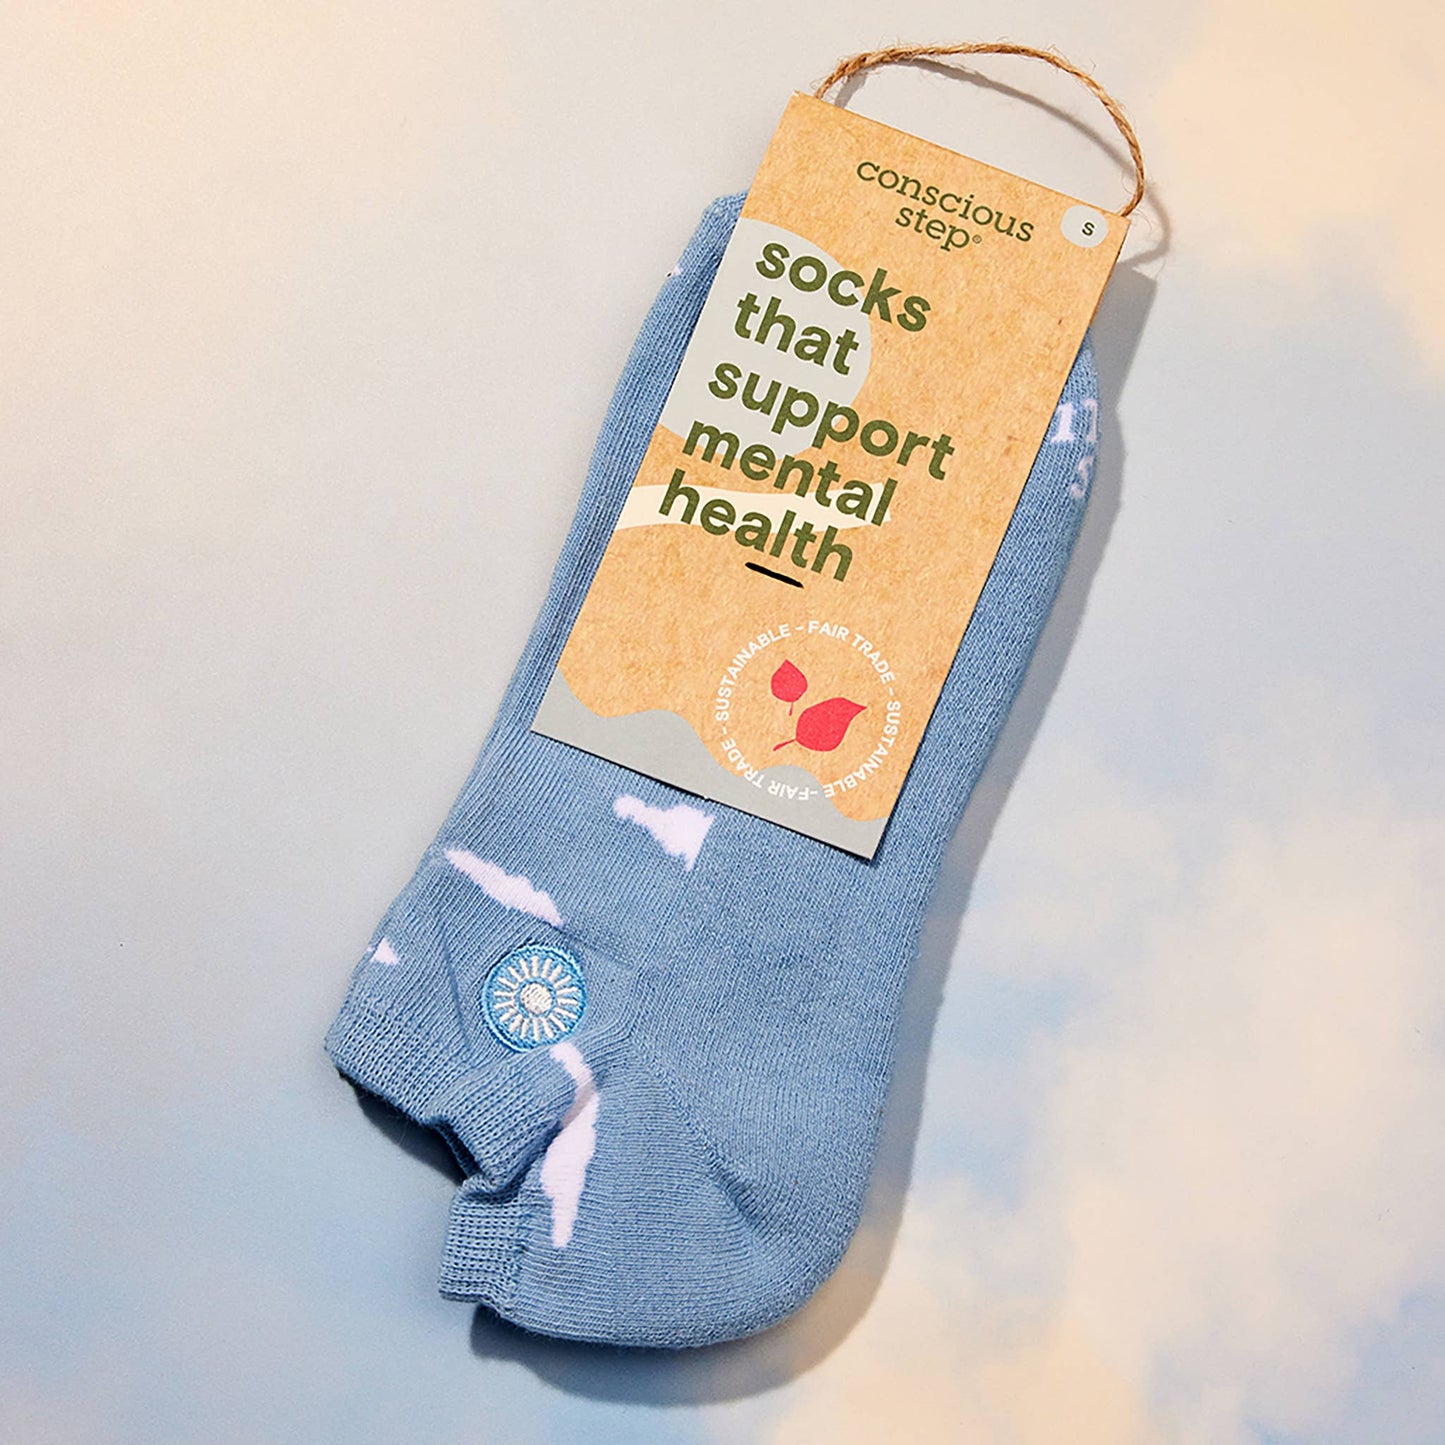 Load image into Gallery viewer, Ankle Socks that Support Mental Health (Floating Clouds): Small - Echo Market
